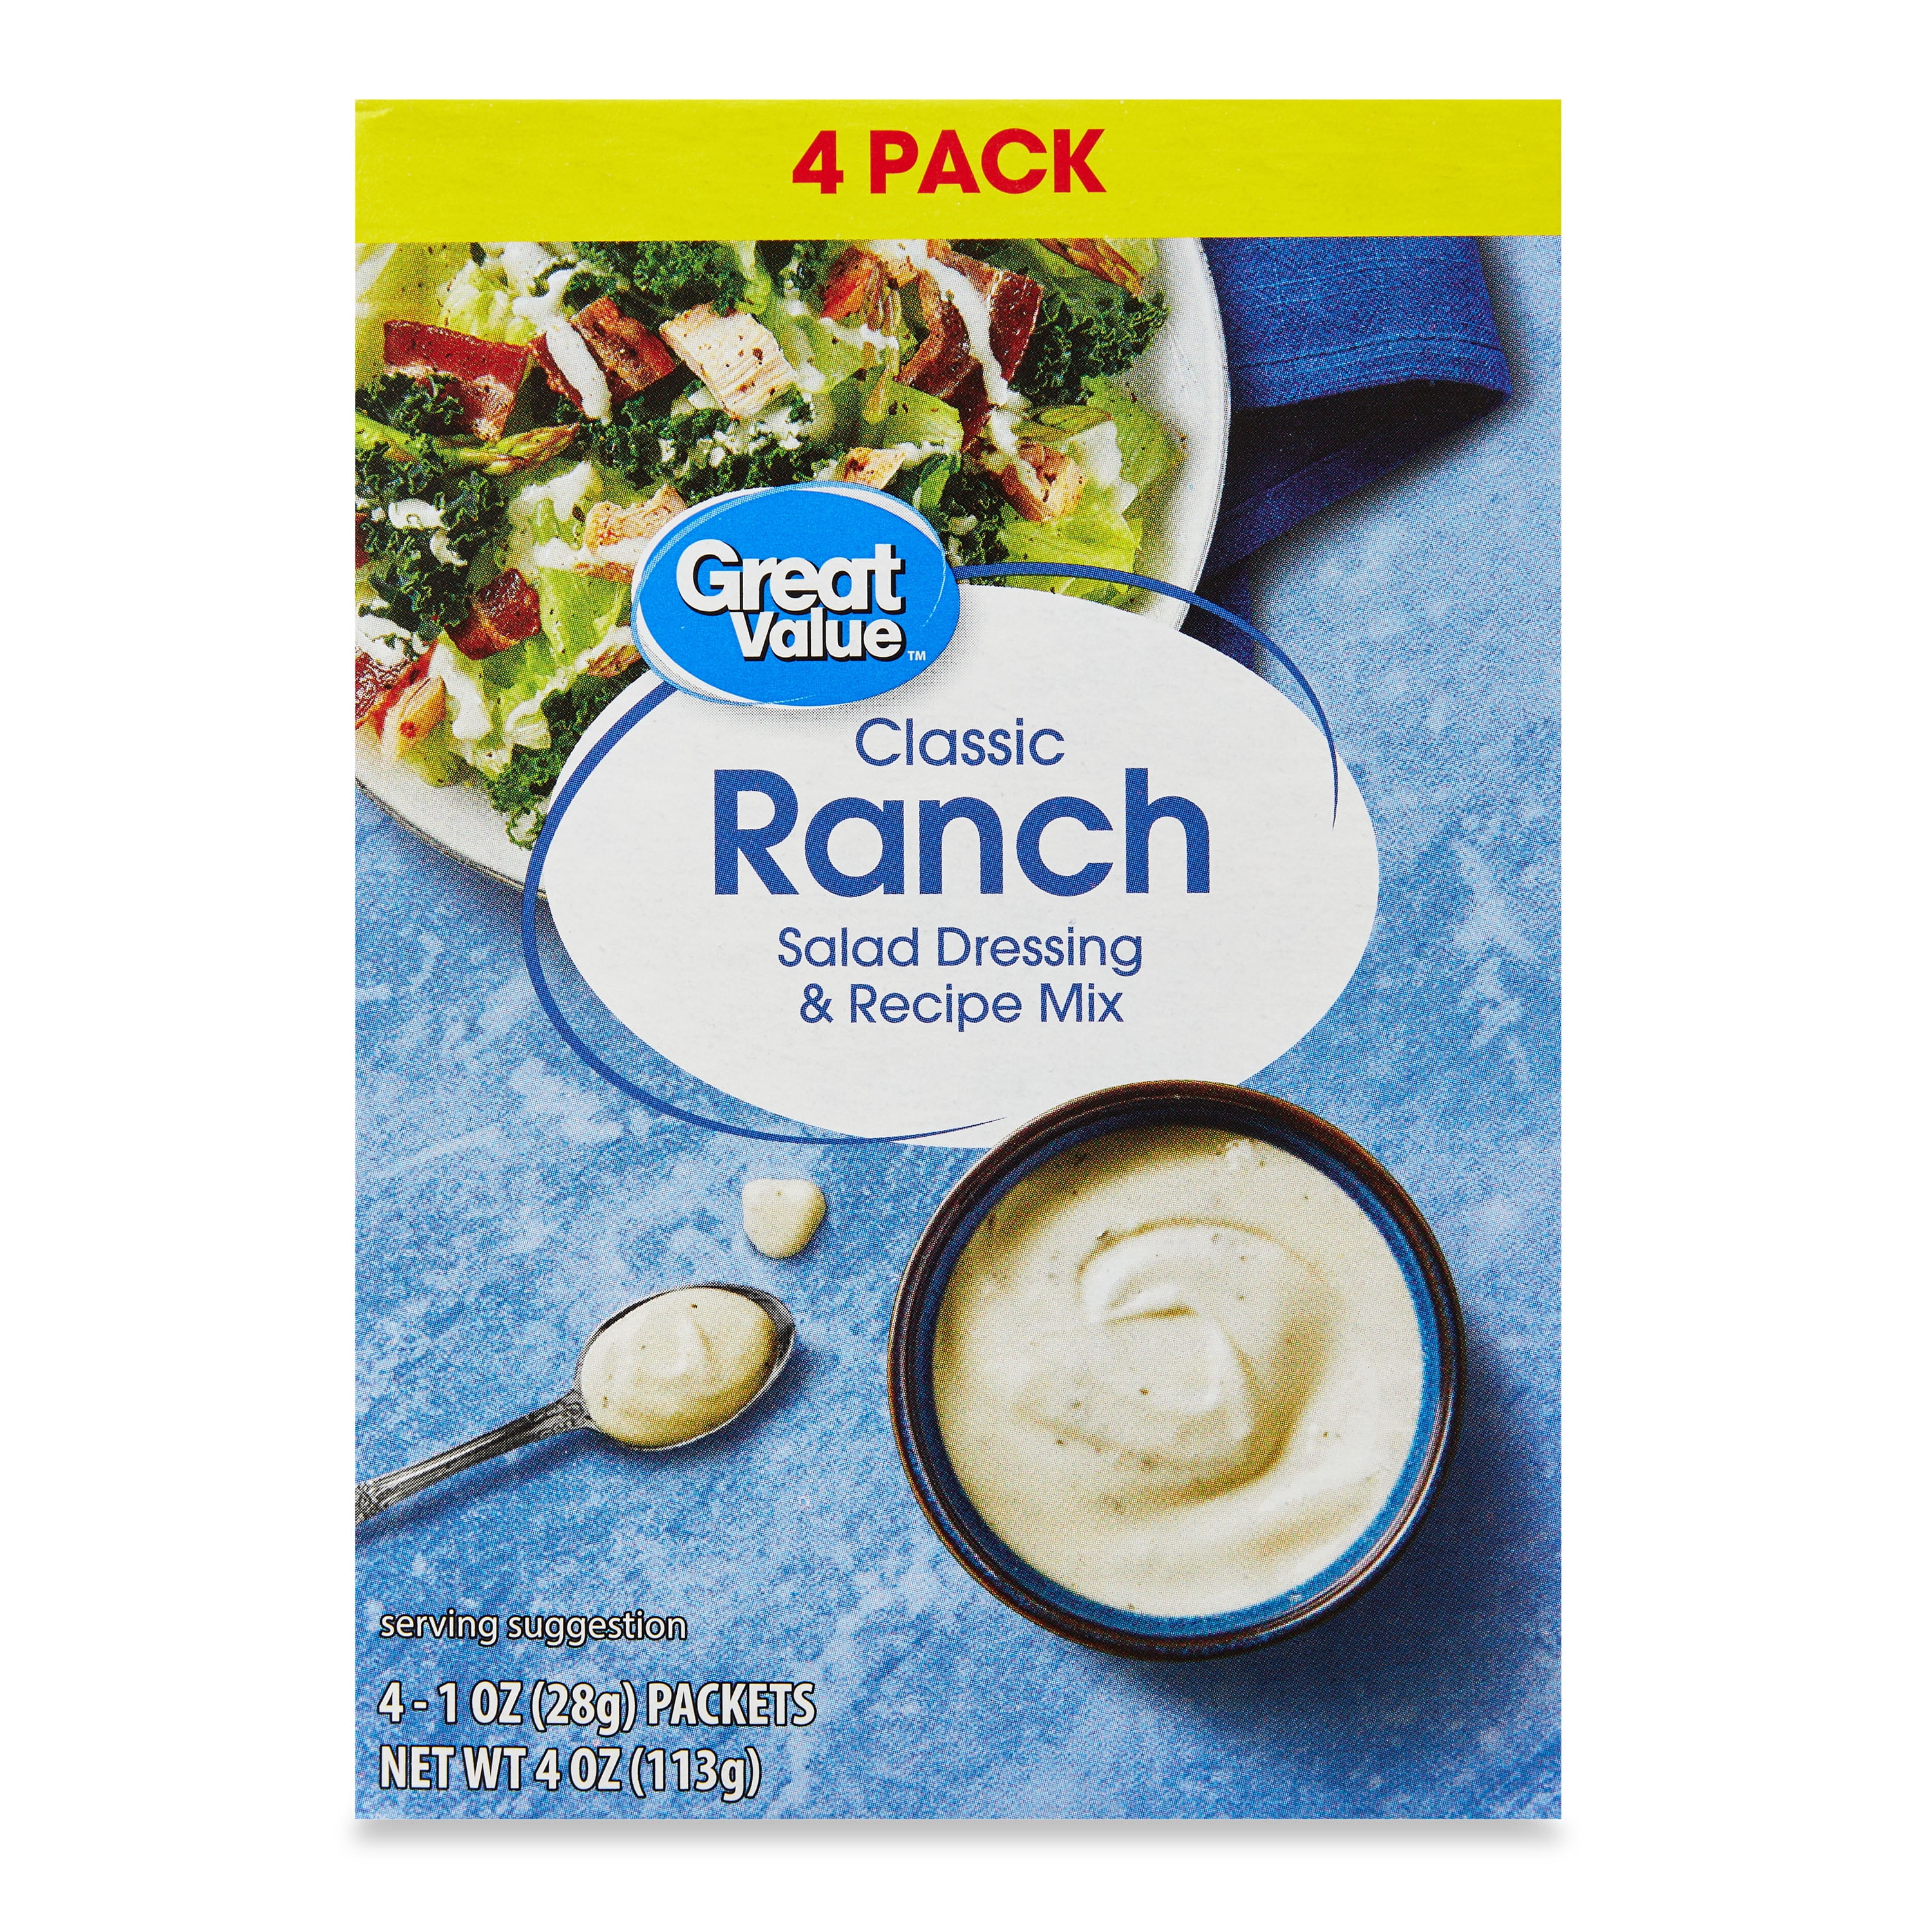 Great Value Classic Ranch Salad Dressing & Recipe Mix, 1 oz Packets, 4 Count